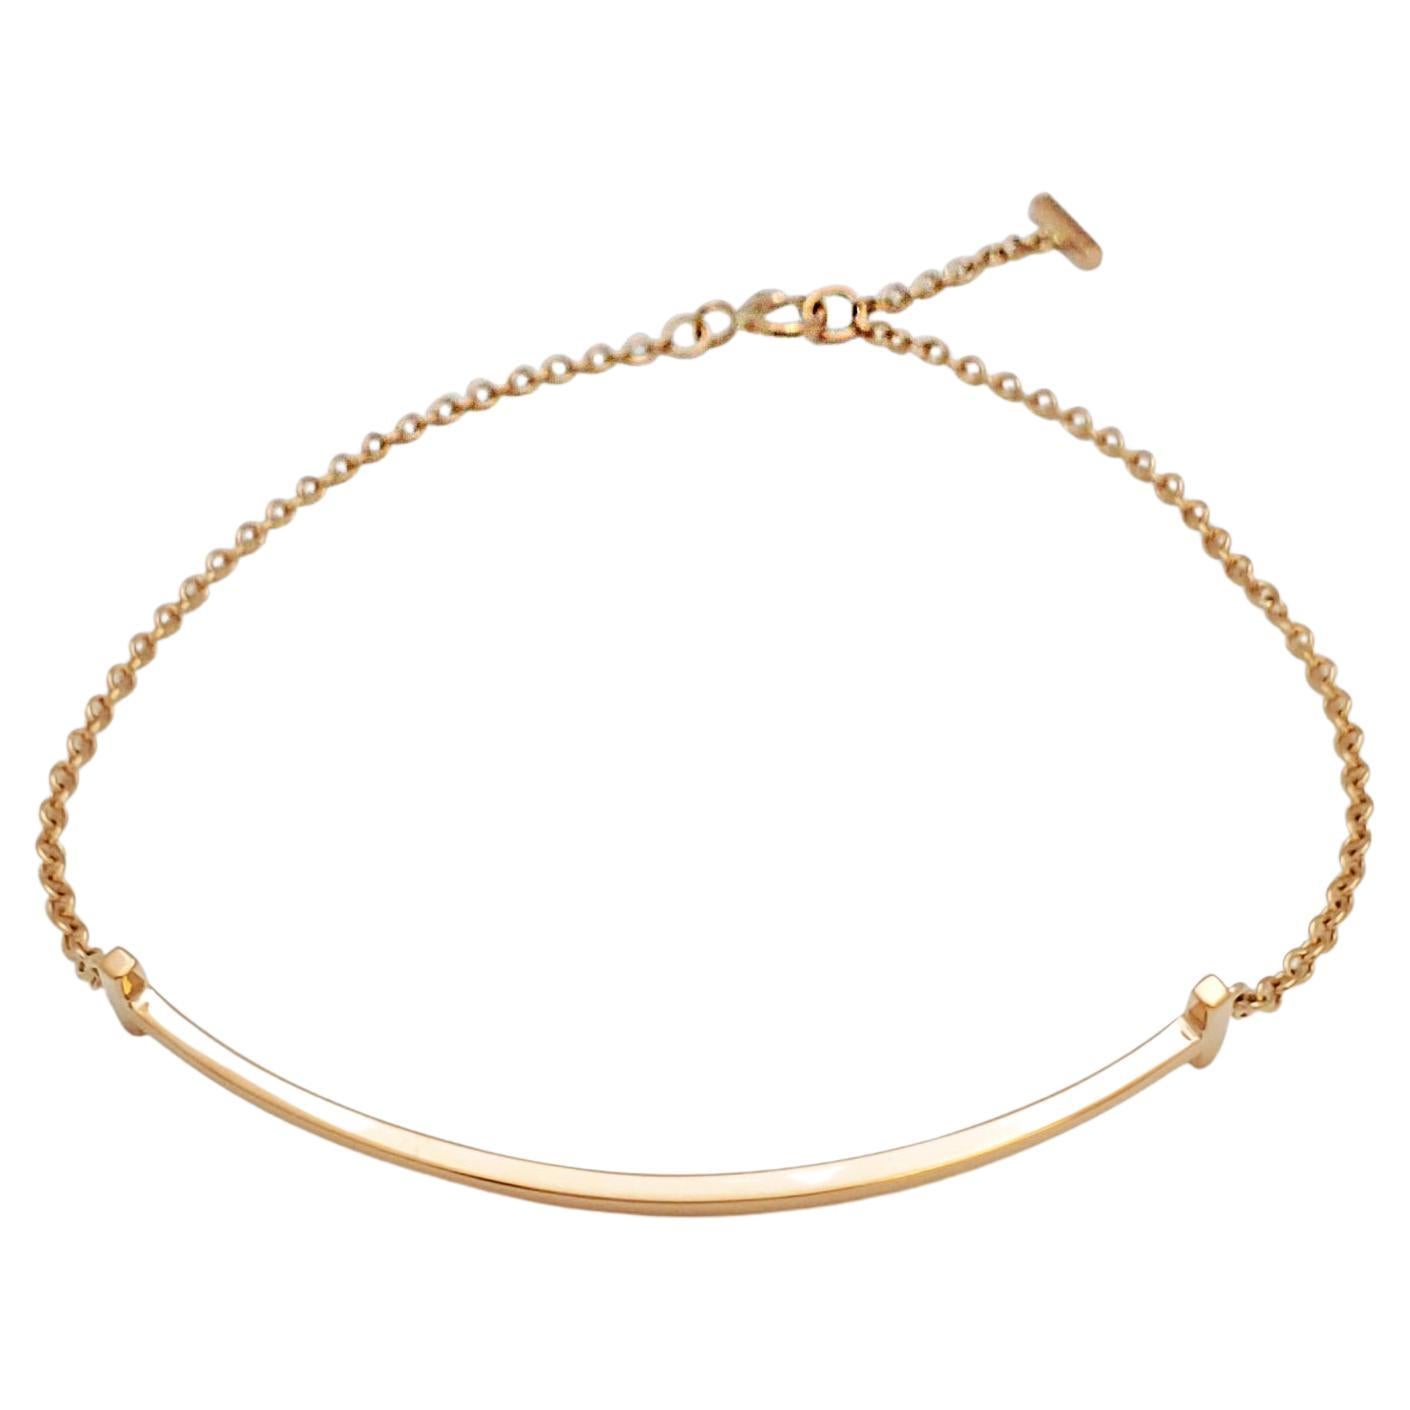 Authentic Tiffany & Co. Smile bracelet from the Tiffany collection crafted in 18 karat rose gold.  The smile motif sits at the center of a delicate chain.  Size large, will fit up to a 6.75 inch wrist.  Signed Tiffany & Co., Au 750, Italy.  Bracelet